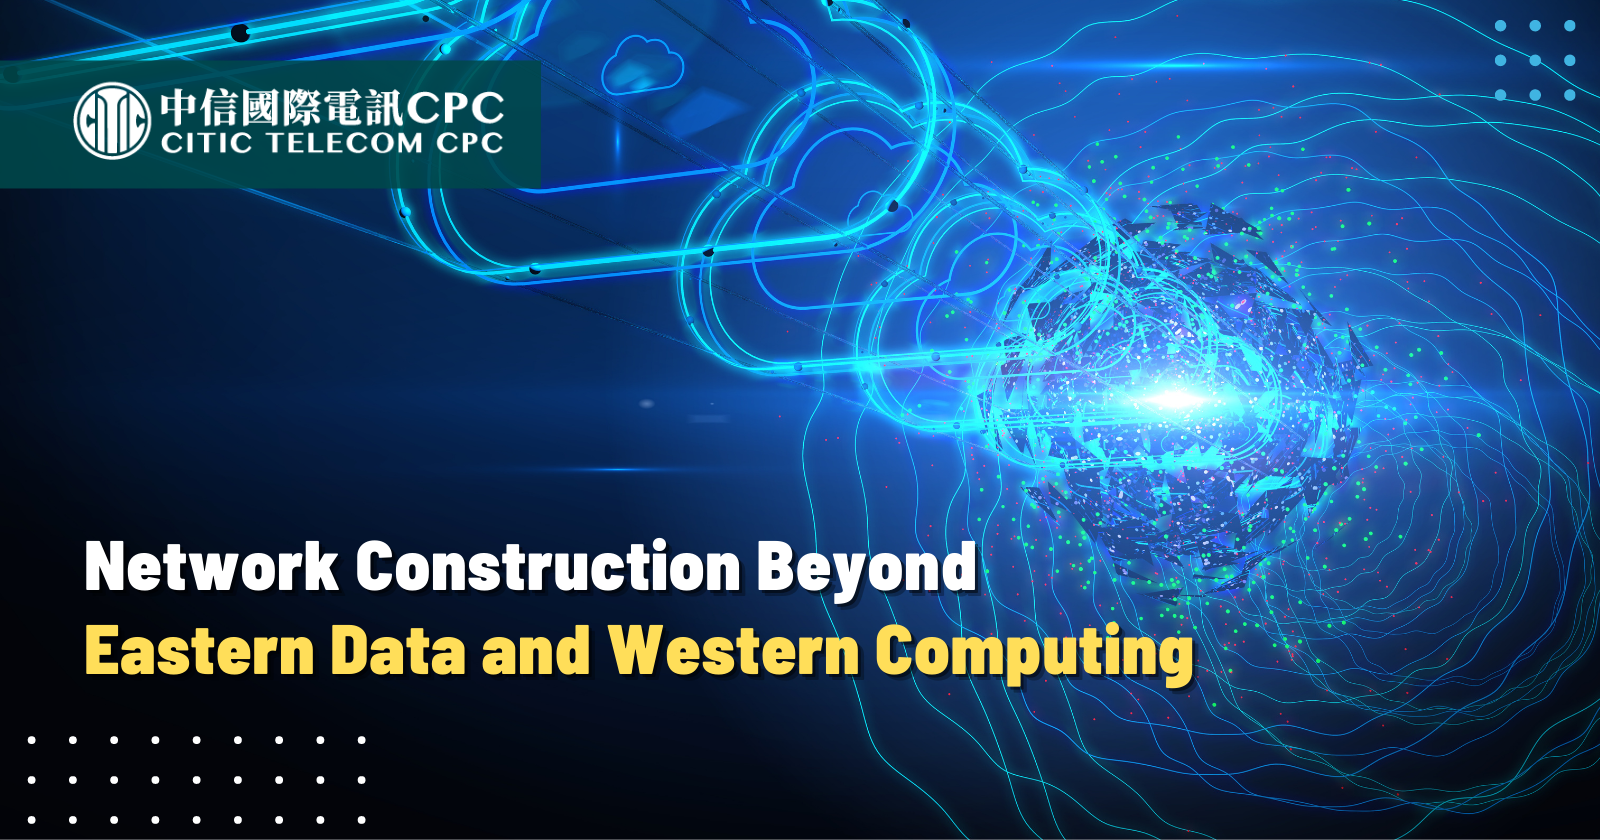 Network Construction: Beyond “Eastern Data and Western Computing”